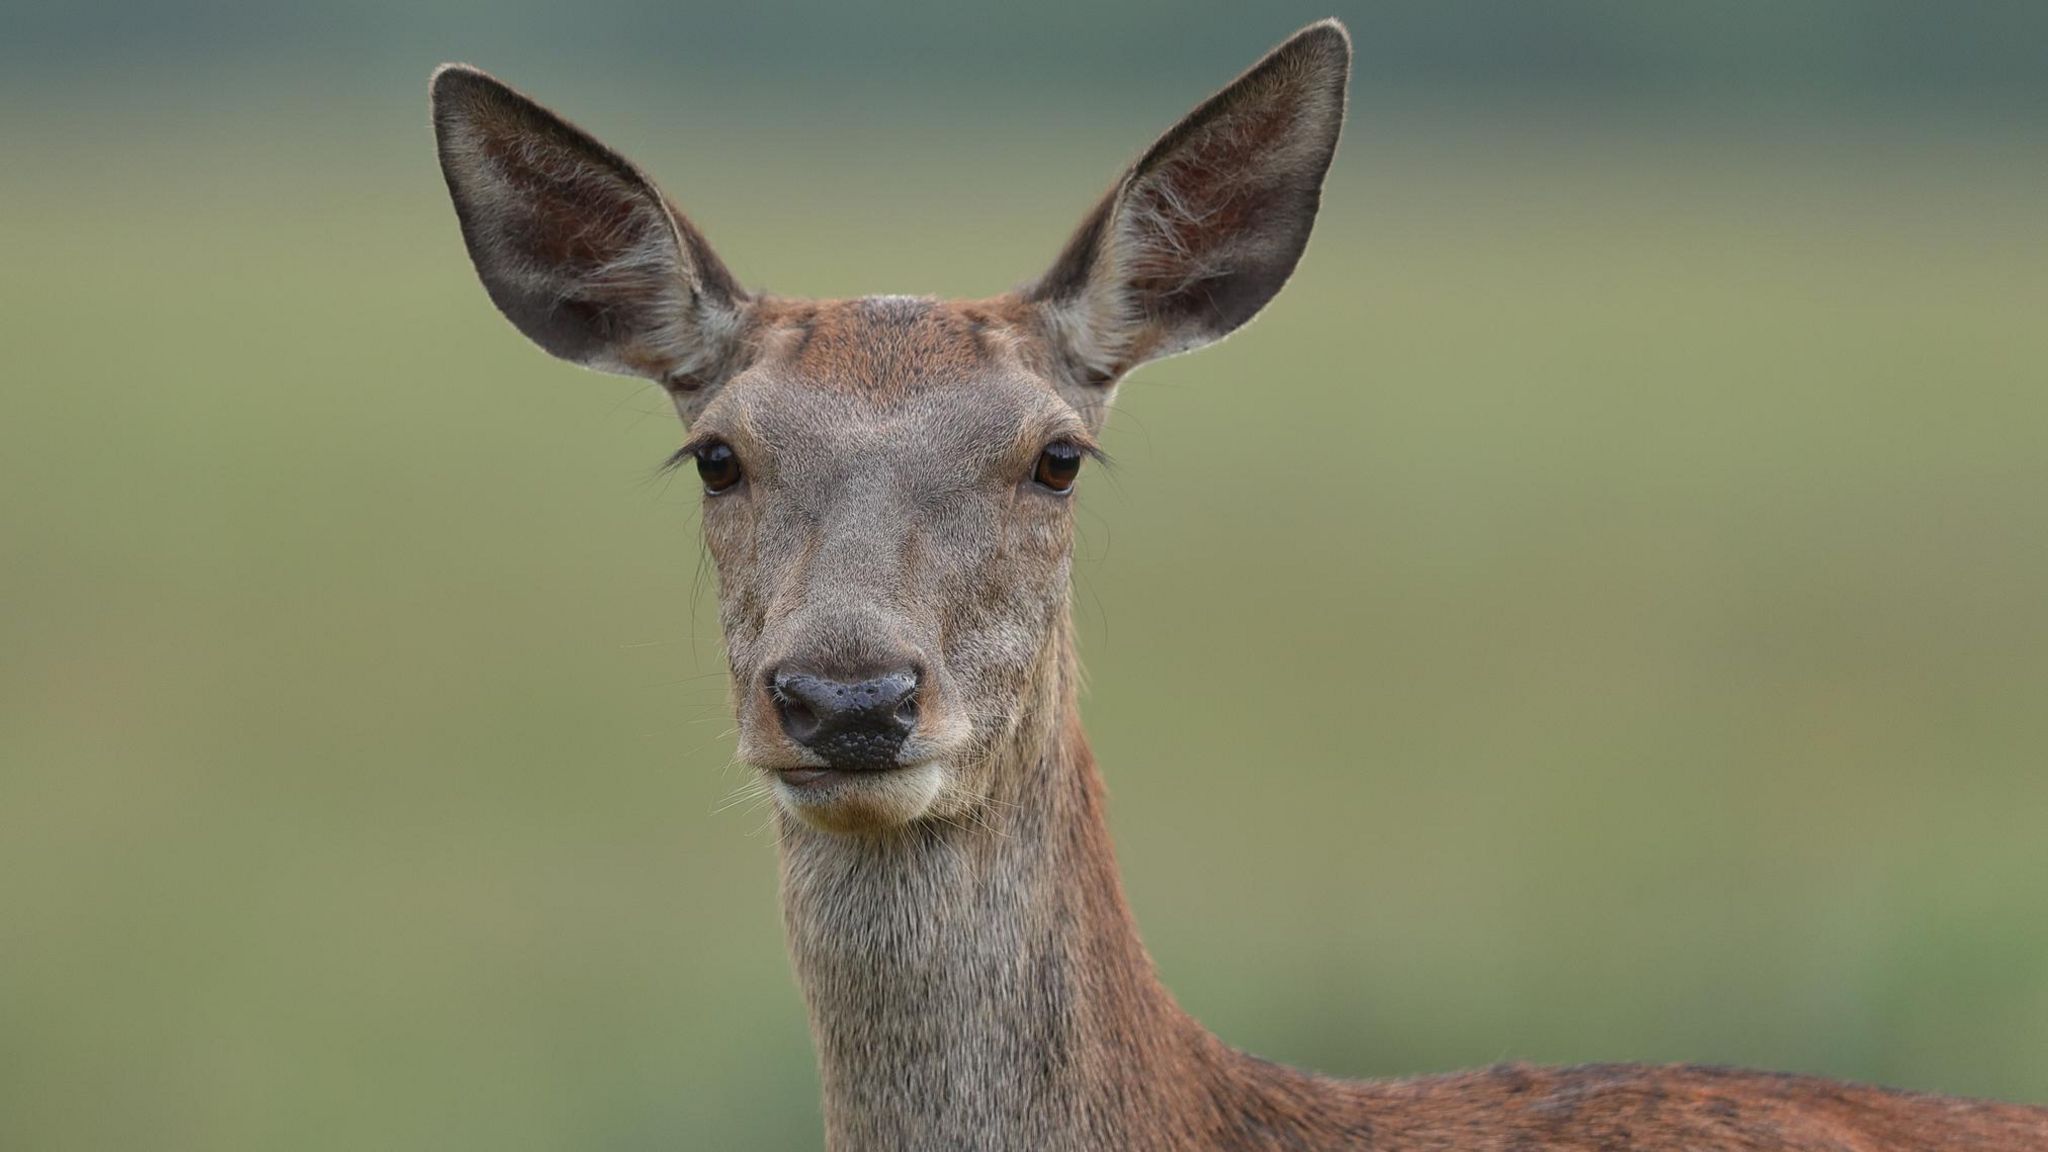 Cull of female deer 'to protect millions of trees' - BBC News